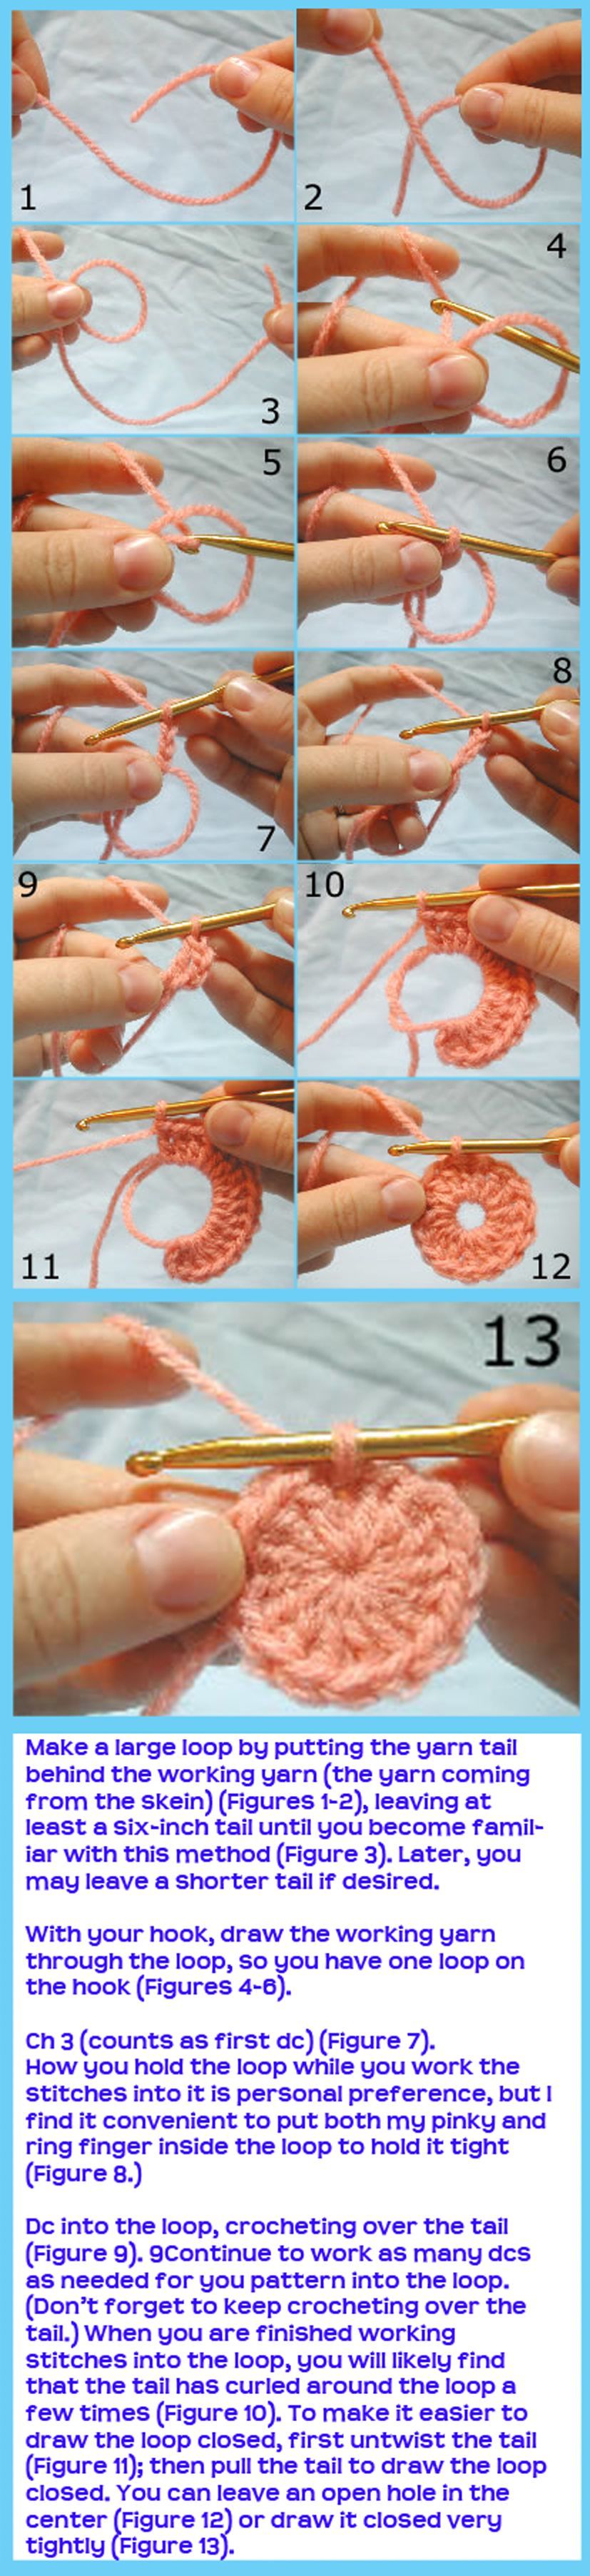 Magic Loop.  In this method, you can crochet a large number of stitches and then close the middle, no